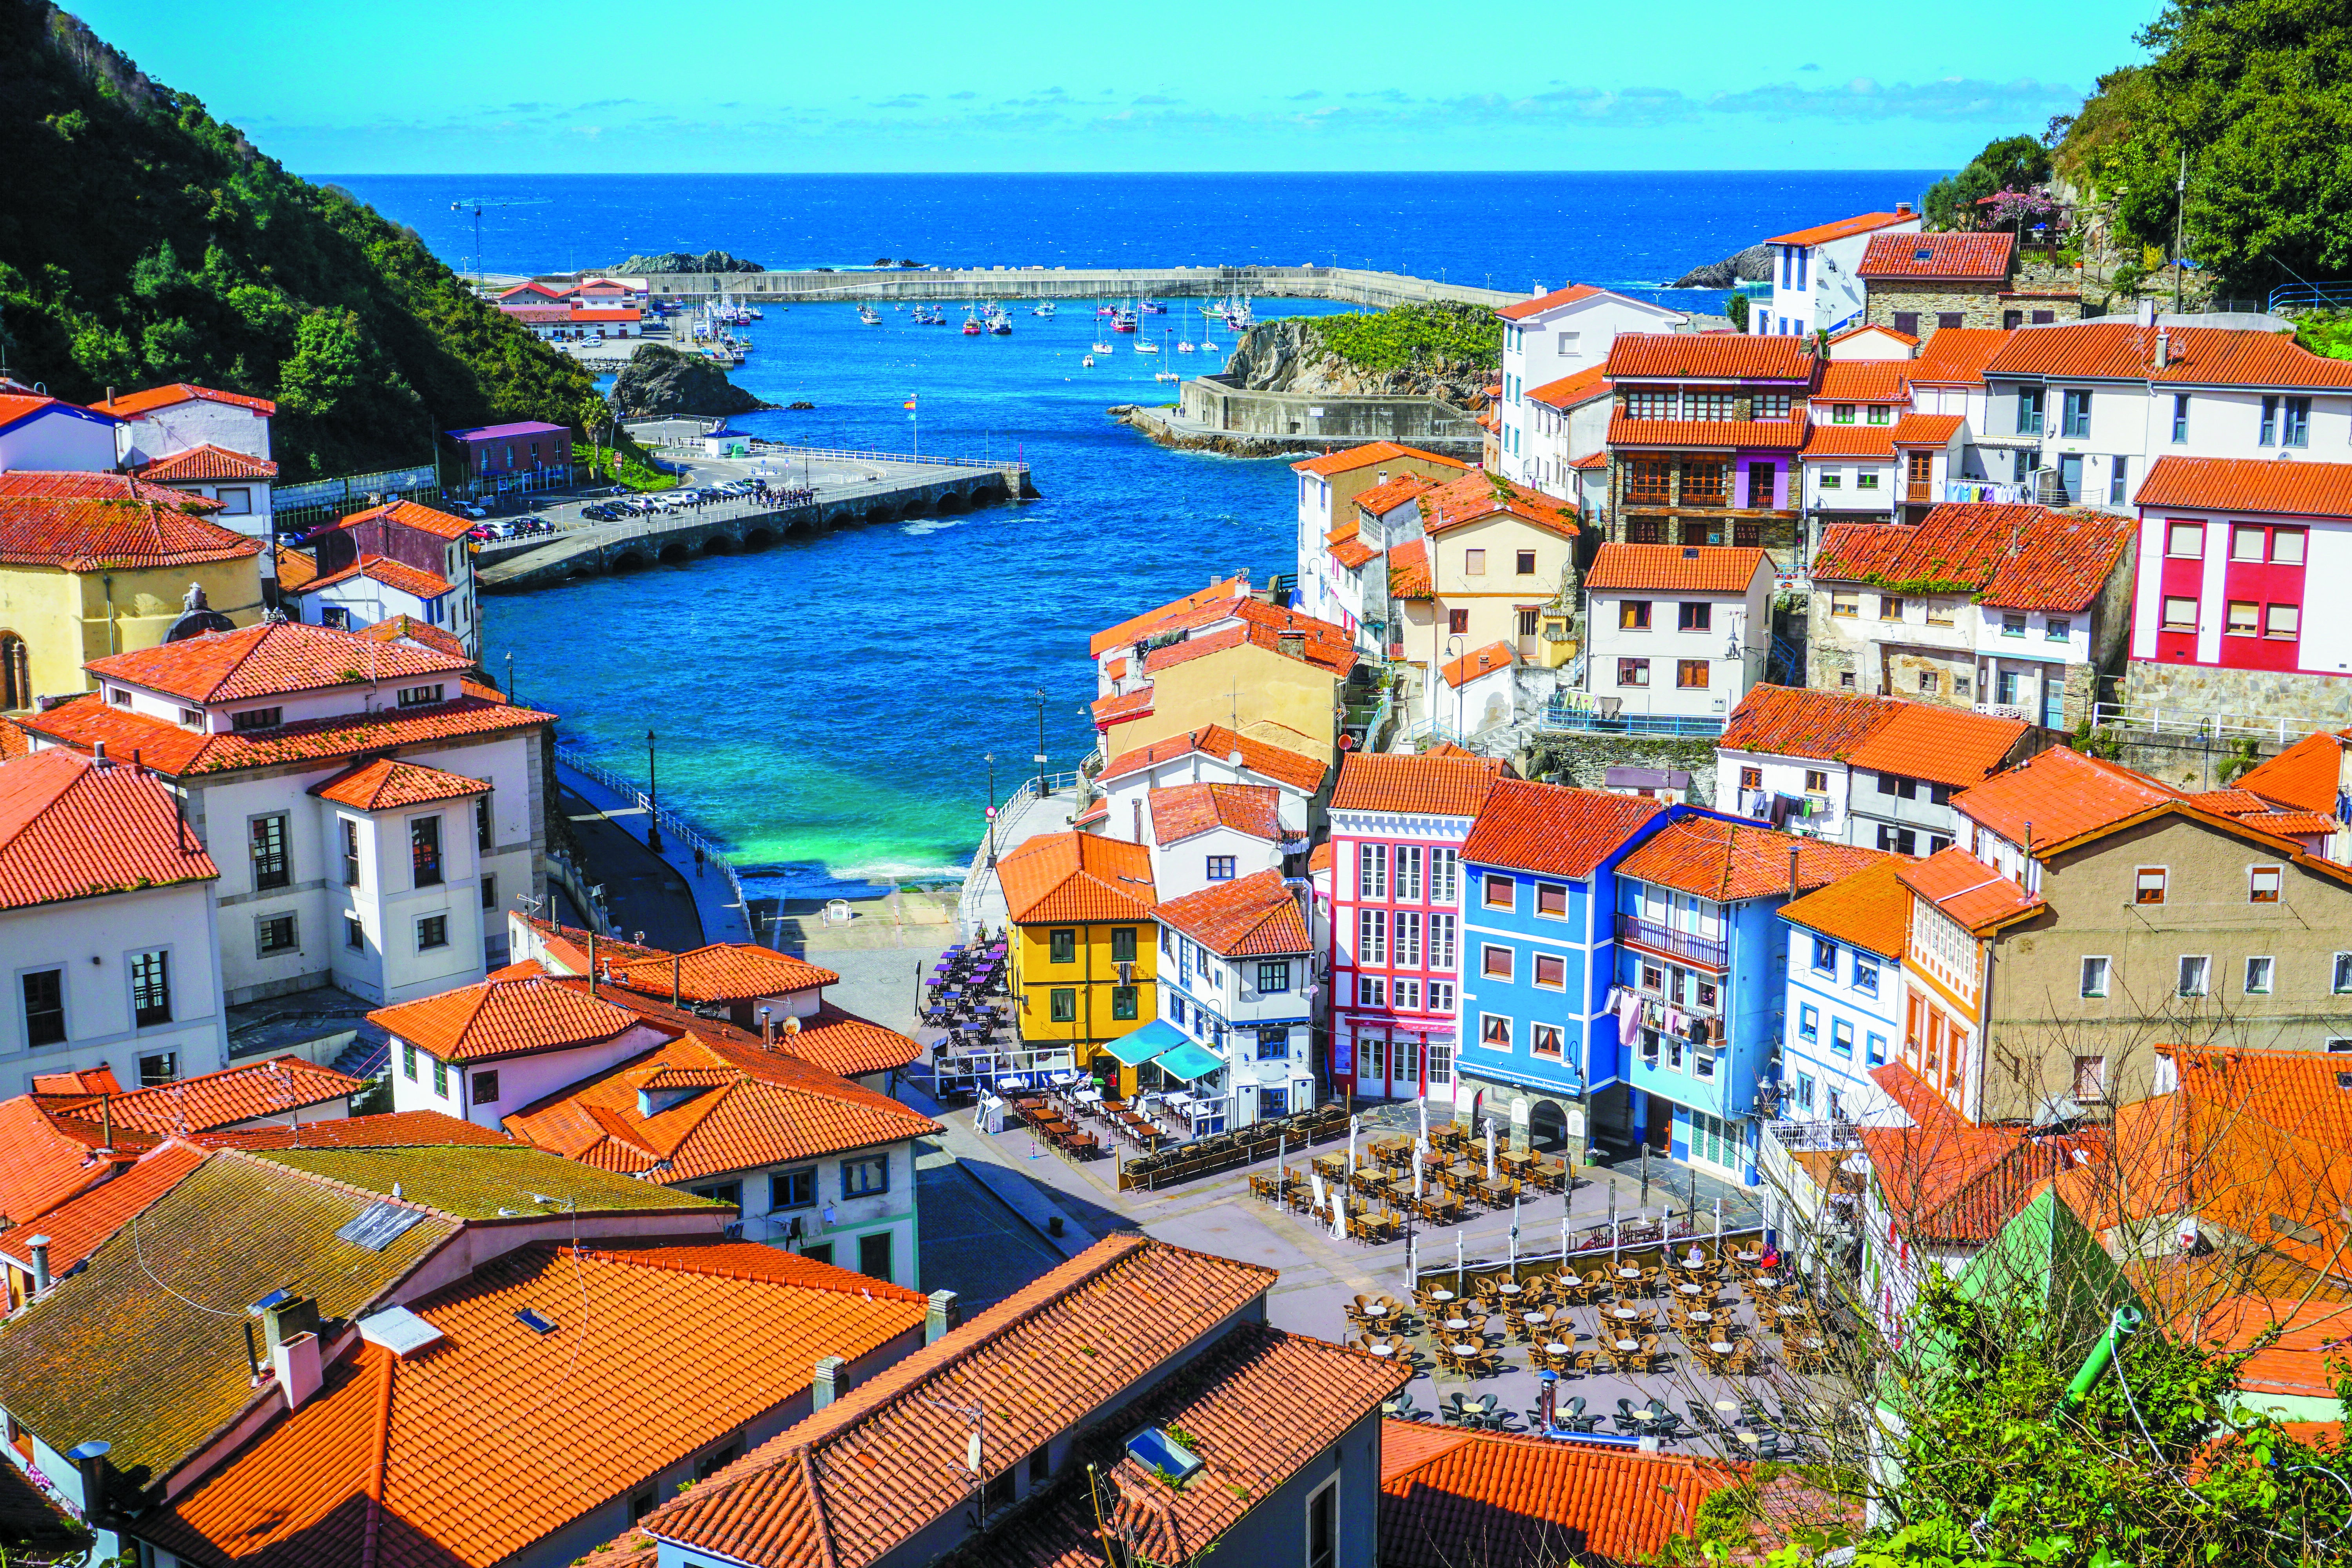 Enjoy delicious seafood in the postcard-perfect village of Cudillero